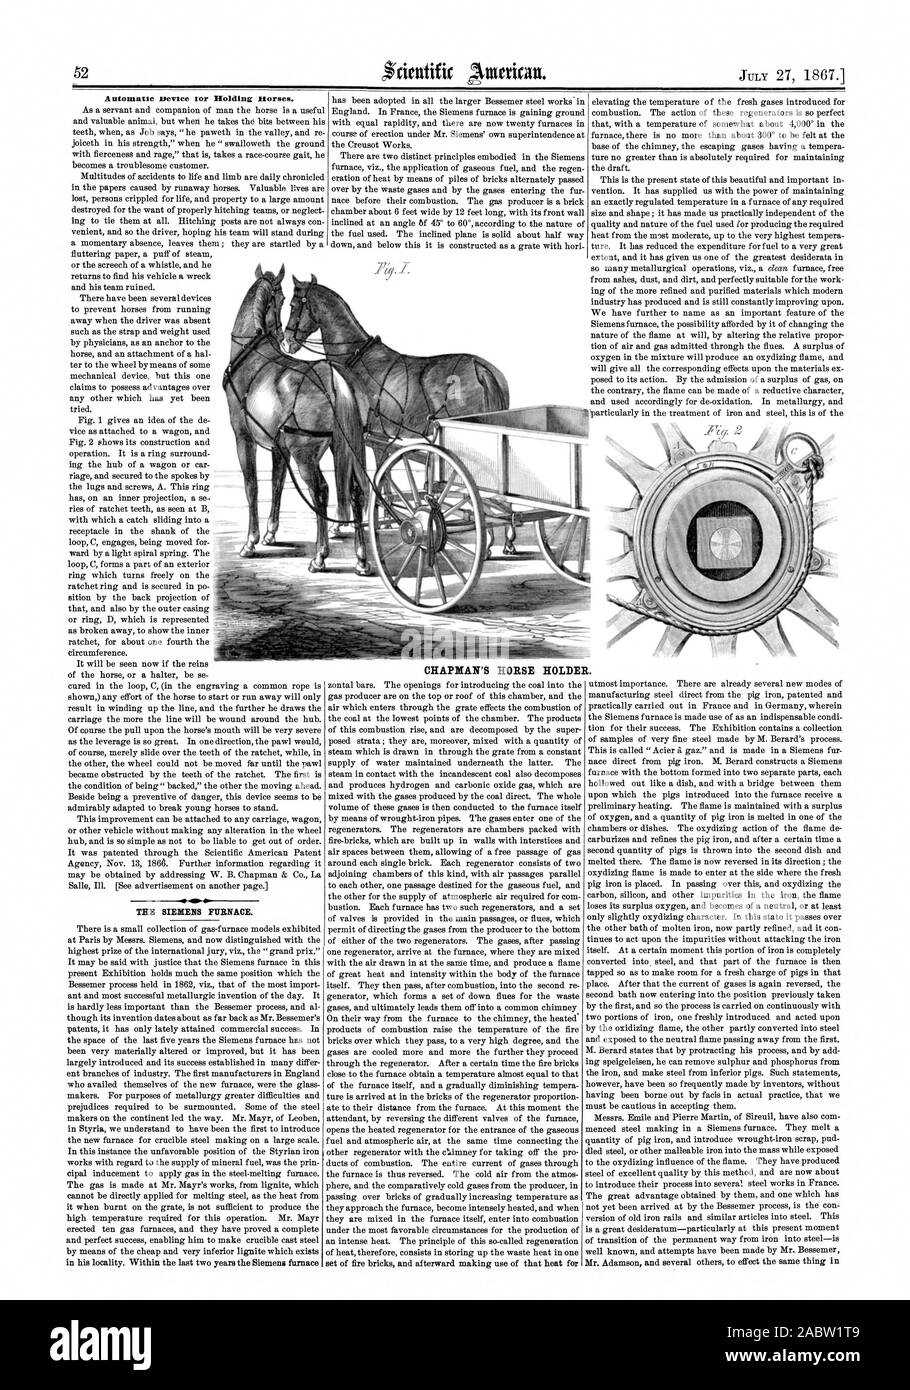 Automatic Device ior Holding tiorses. THE SIEMENS FURNACE. CHAPMAN'S HORSE HOLDER., scientific american, 1867-07-27 Stock Photo